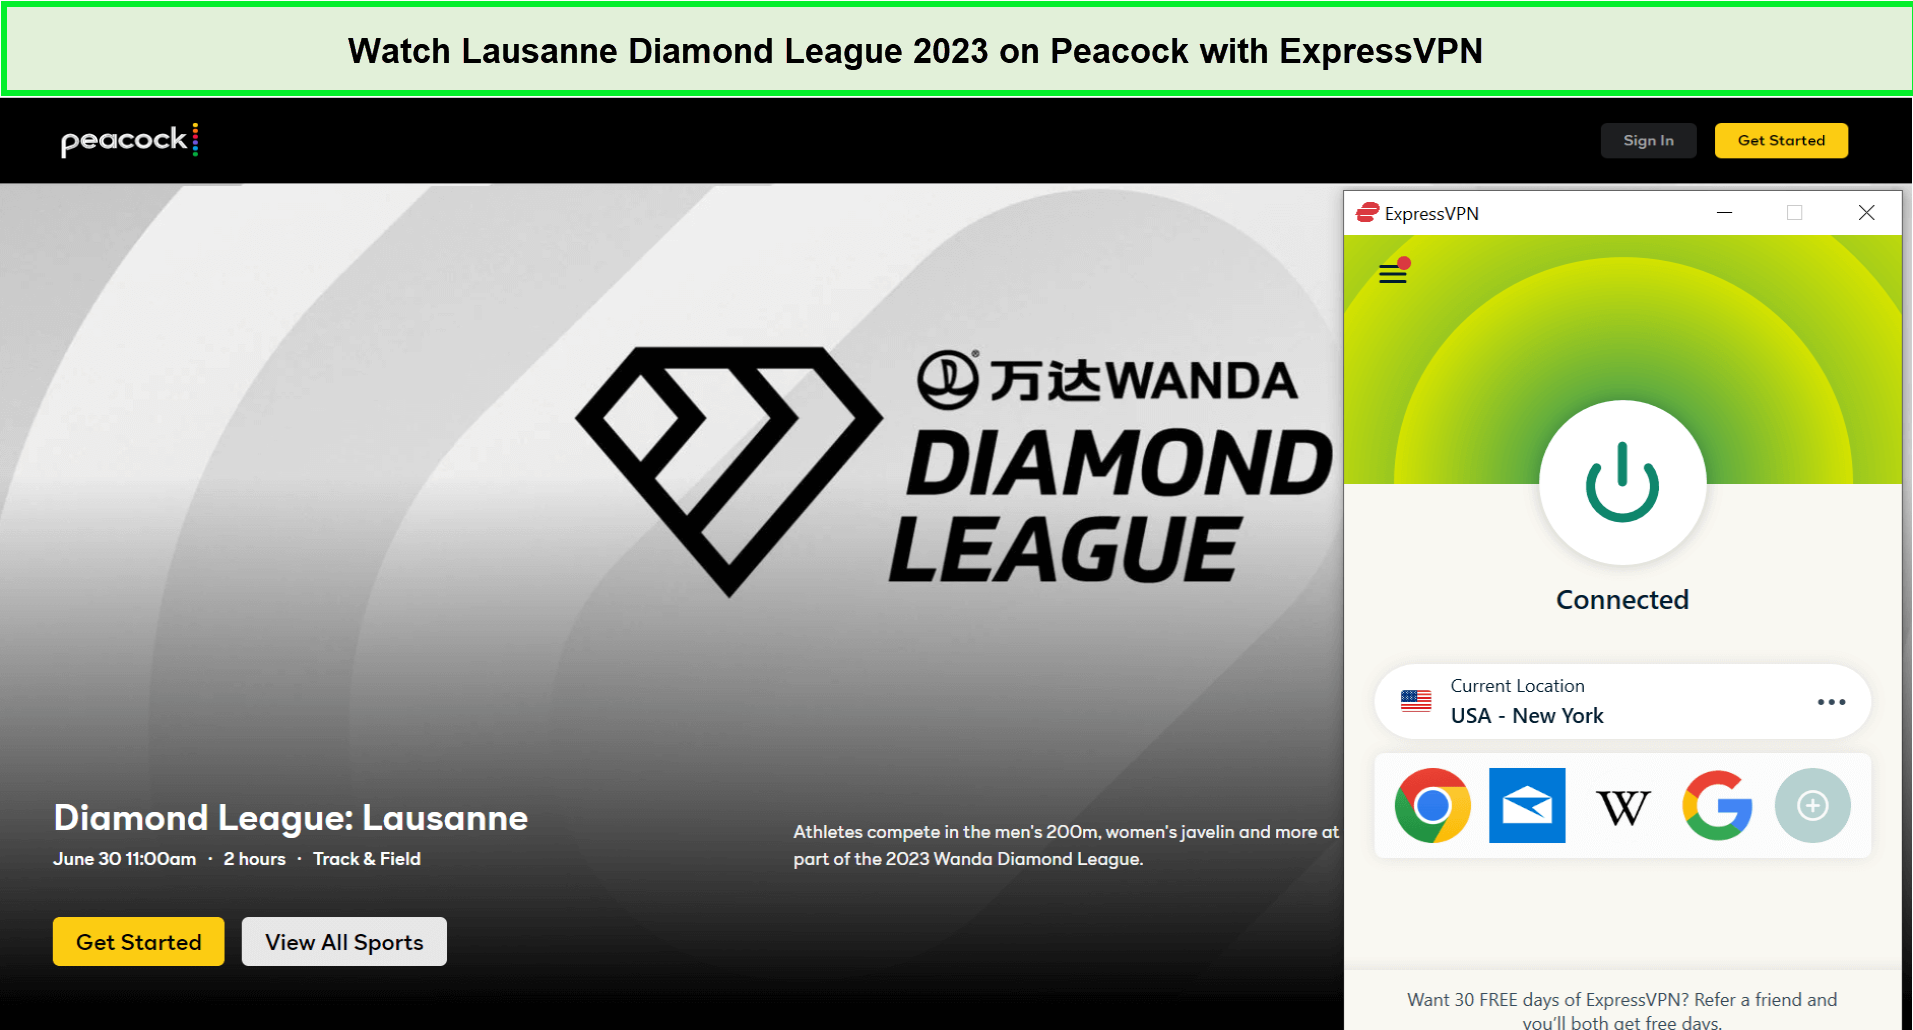 Watch-Lausanne-Diamond-League-2023-in-Italy-on-Peacock-with-ExpressVPN